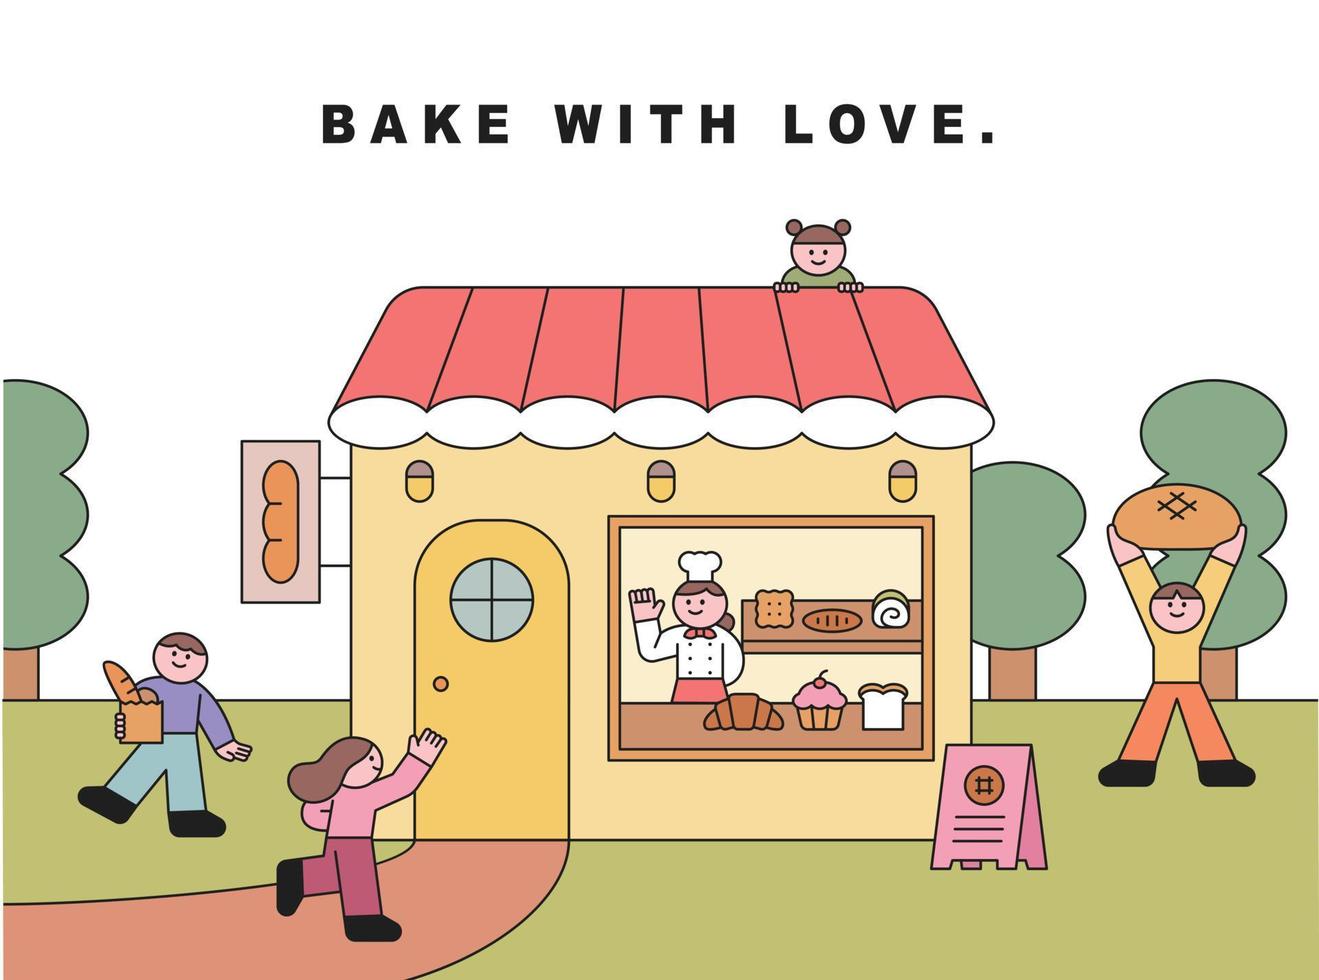 Cute bakery in the woods. A cute baker is selling bread and people come to buy it. vector